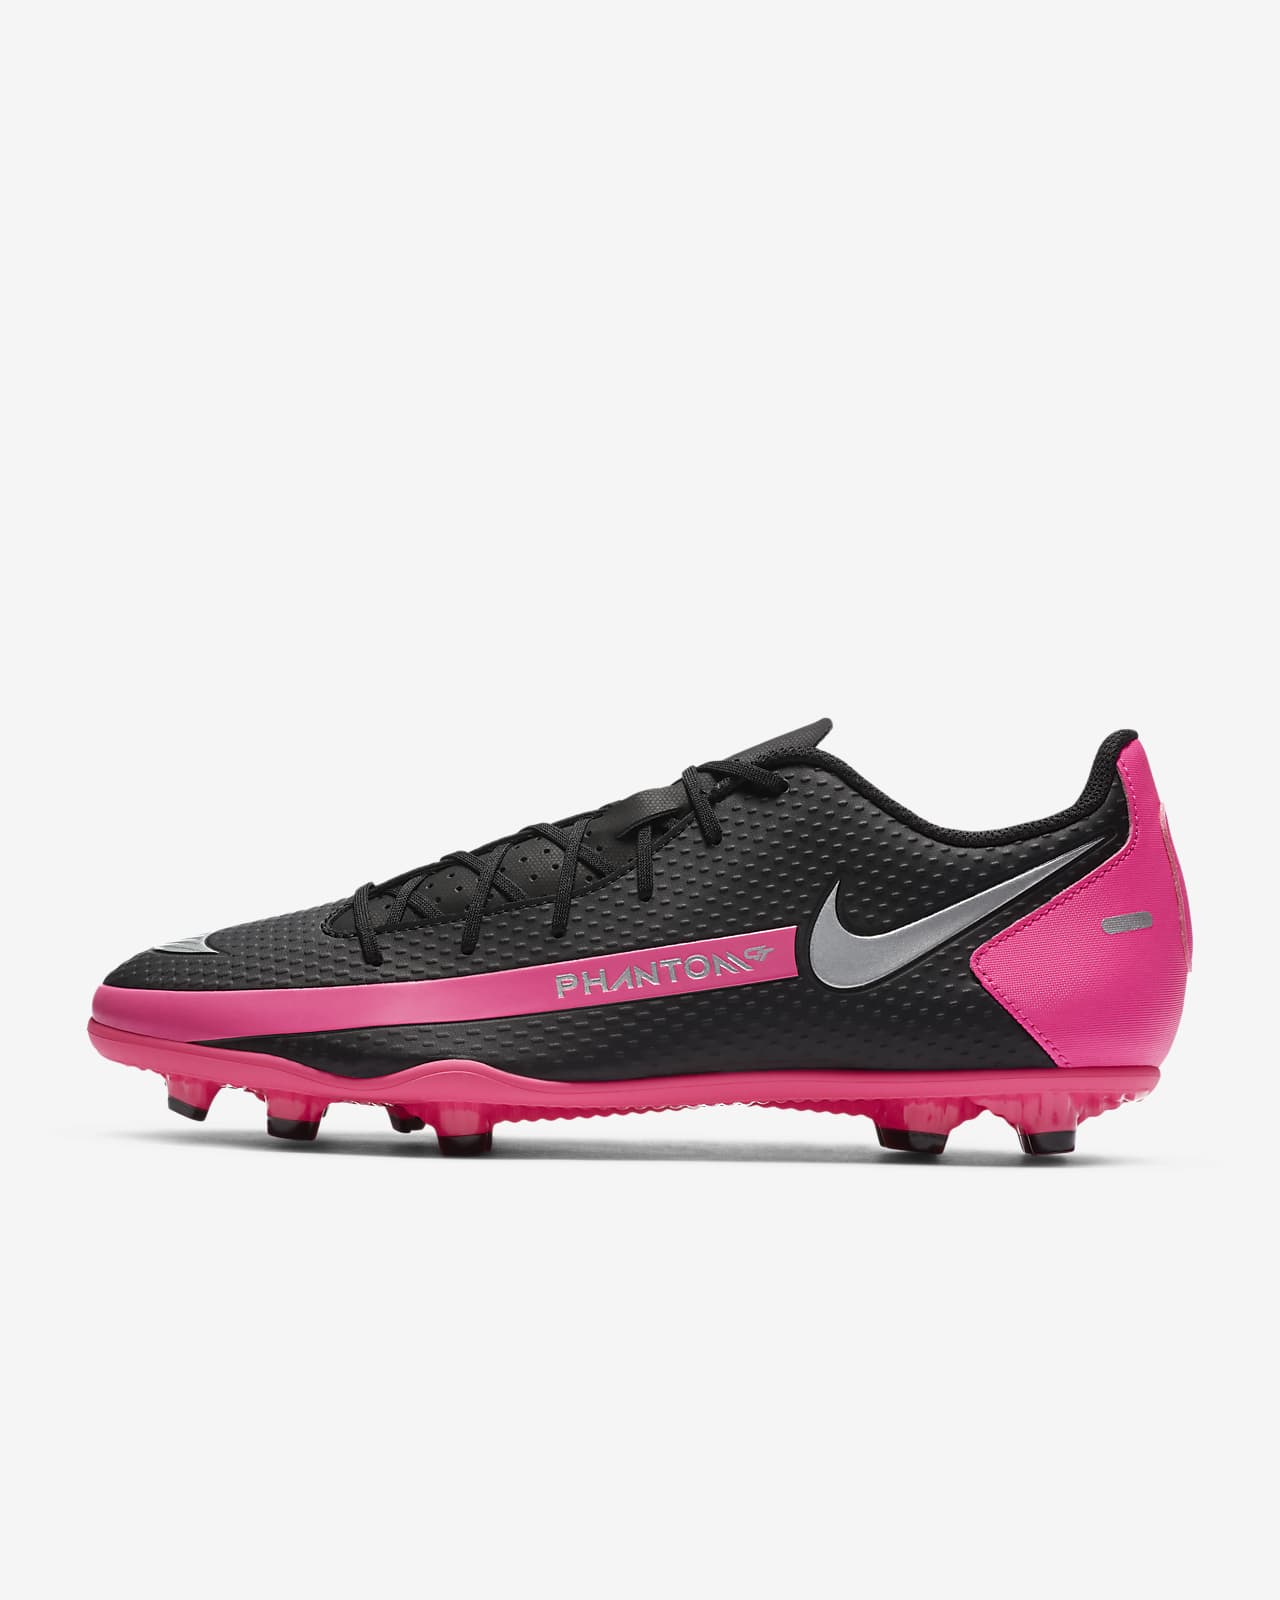 Nike 10c Soccer Cleats Top Sellers, UP 